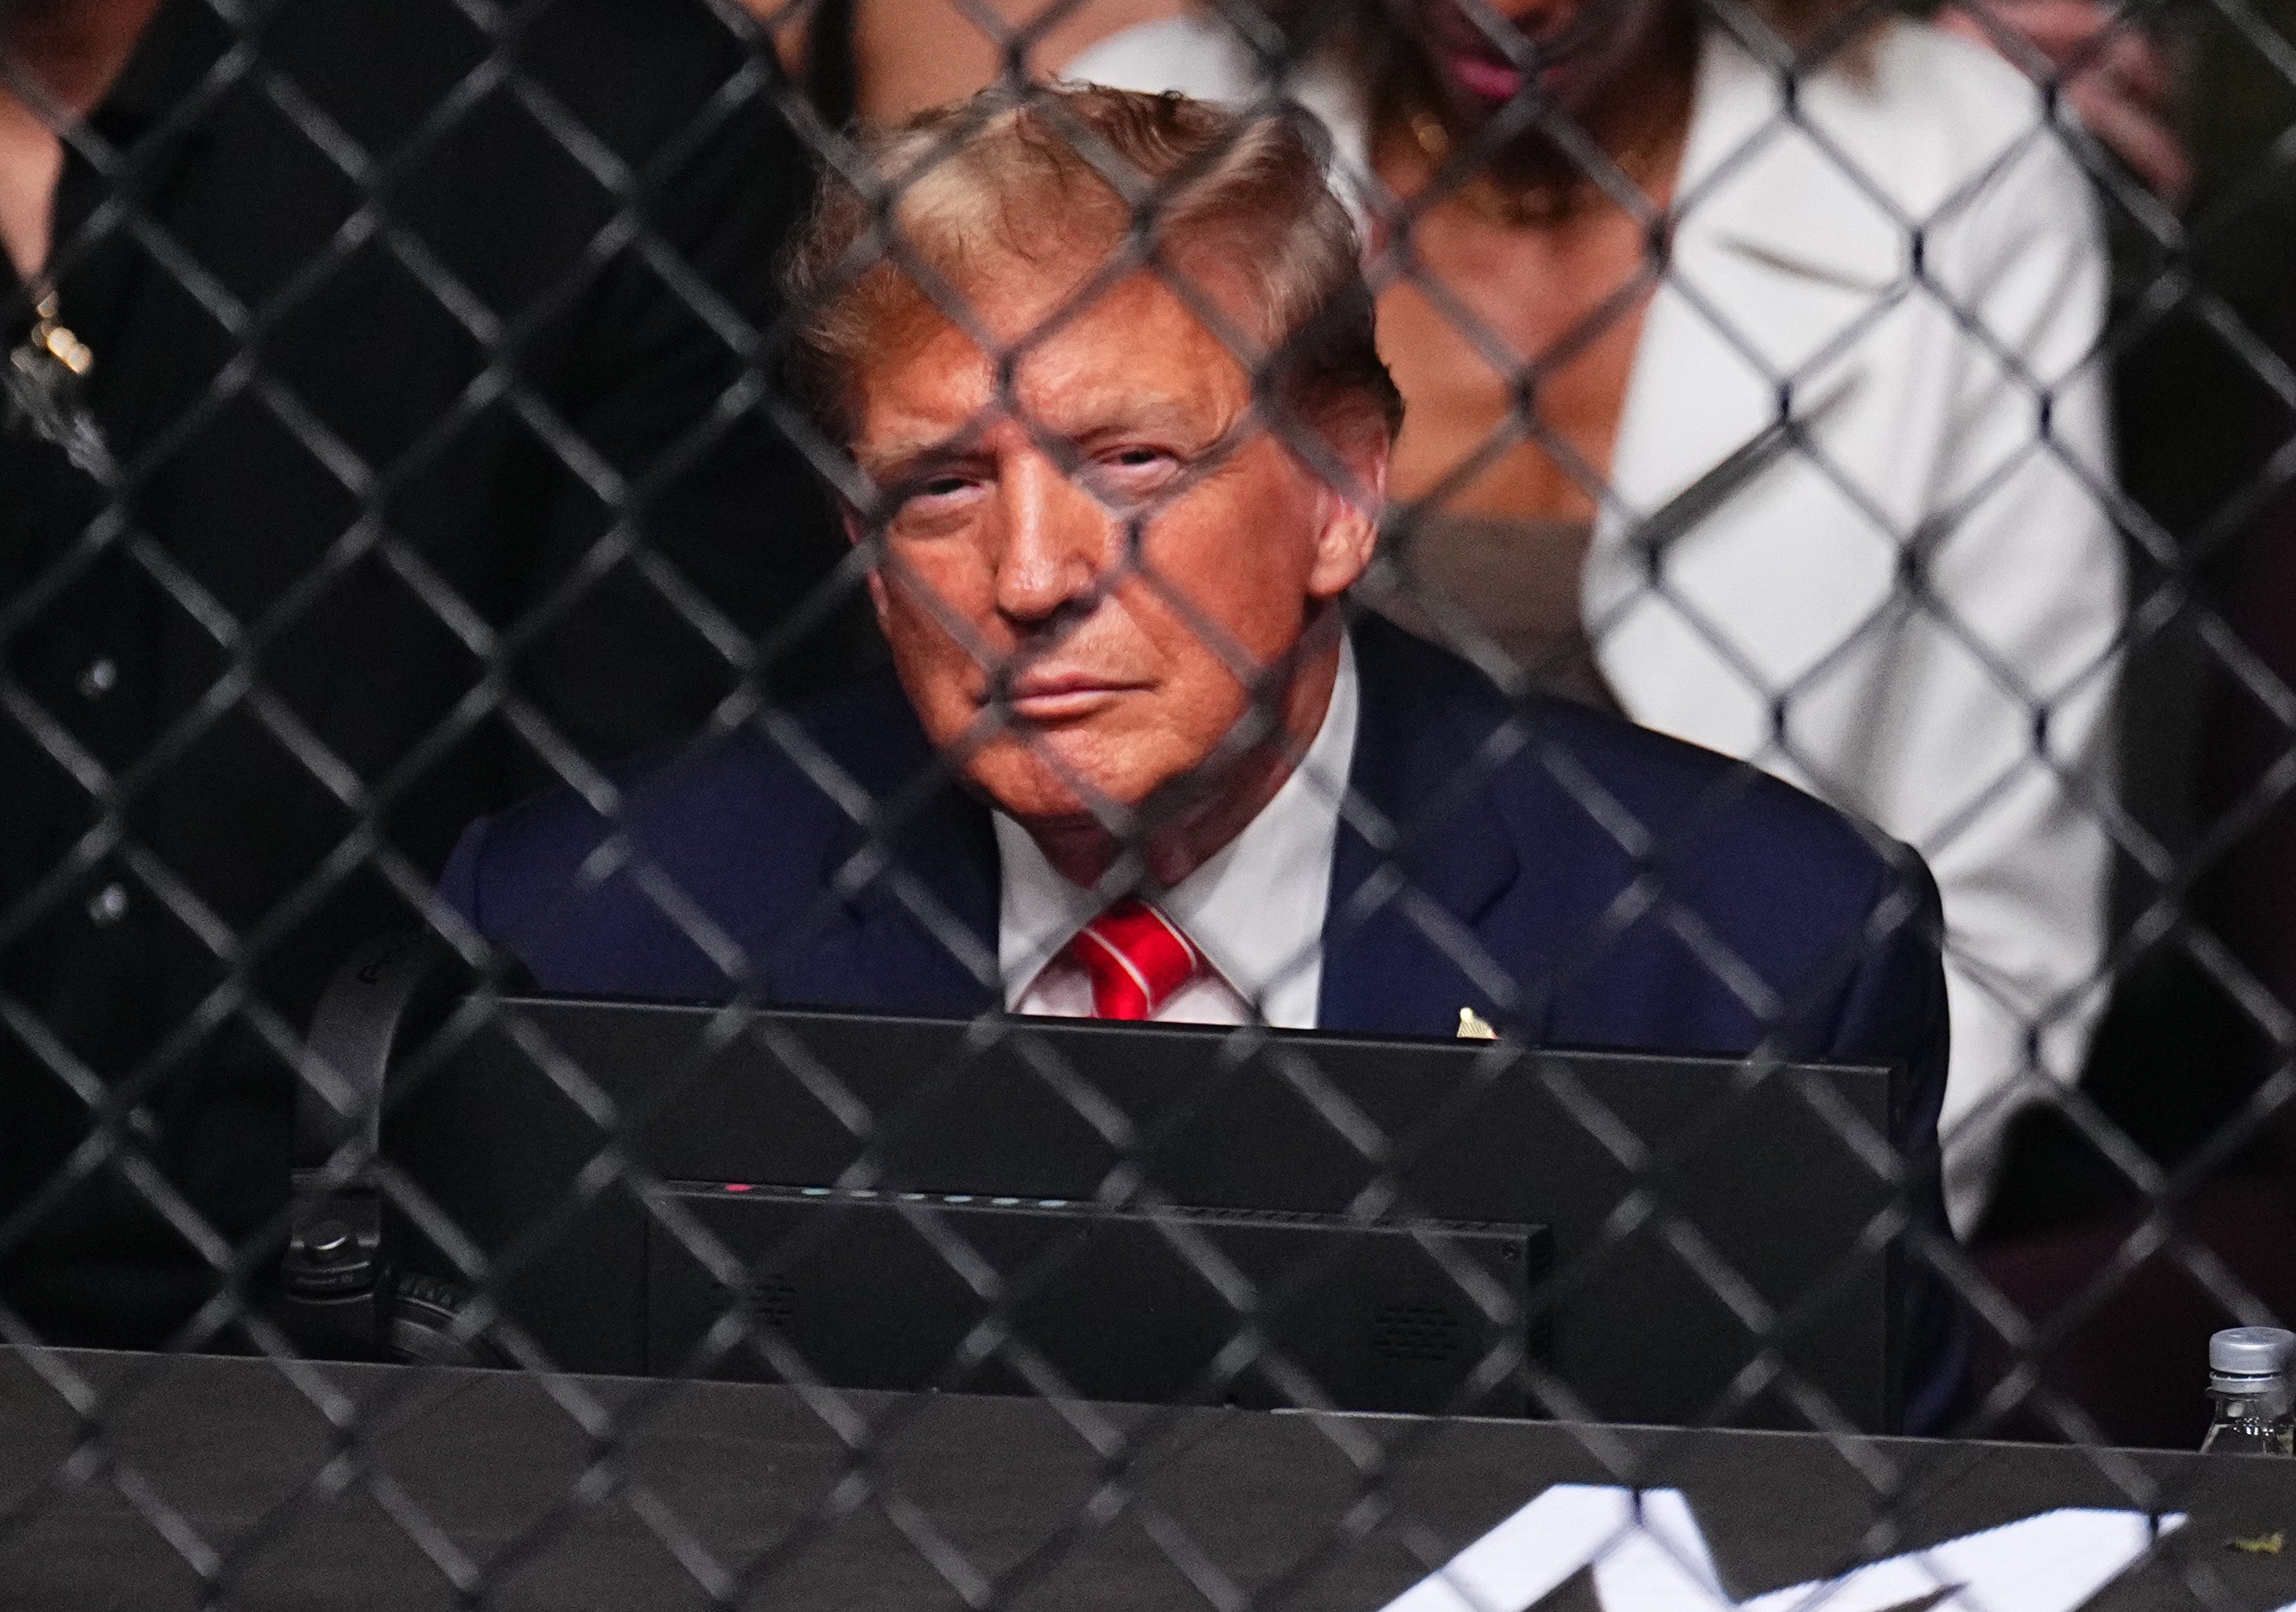 Donald Trump attended the UFC fights on Saturday